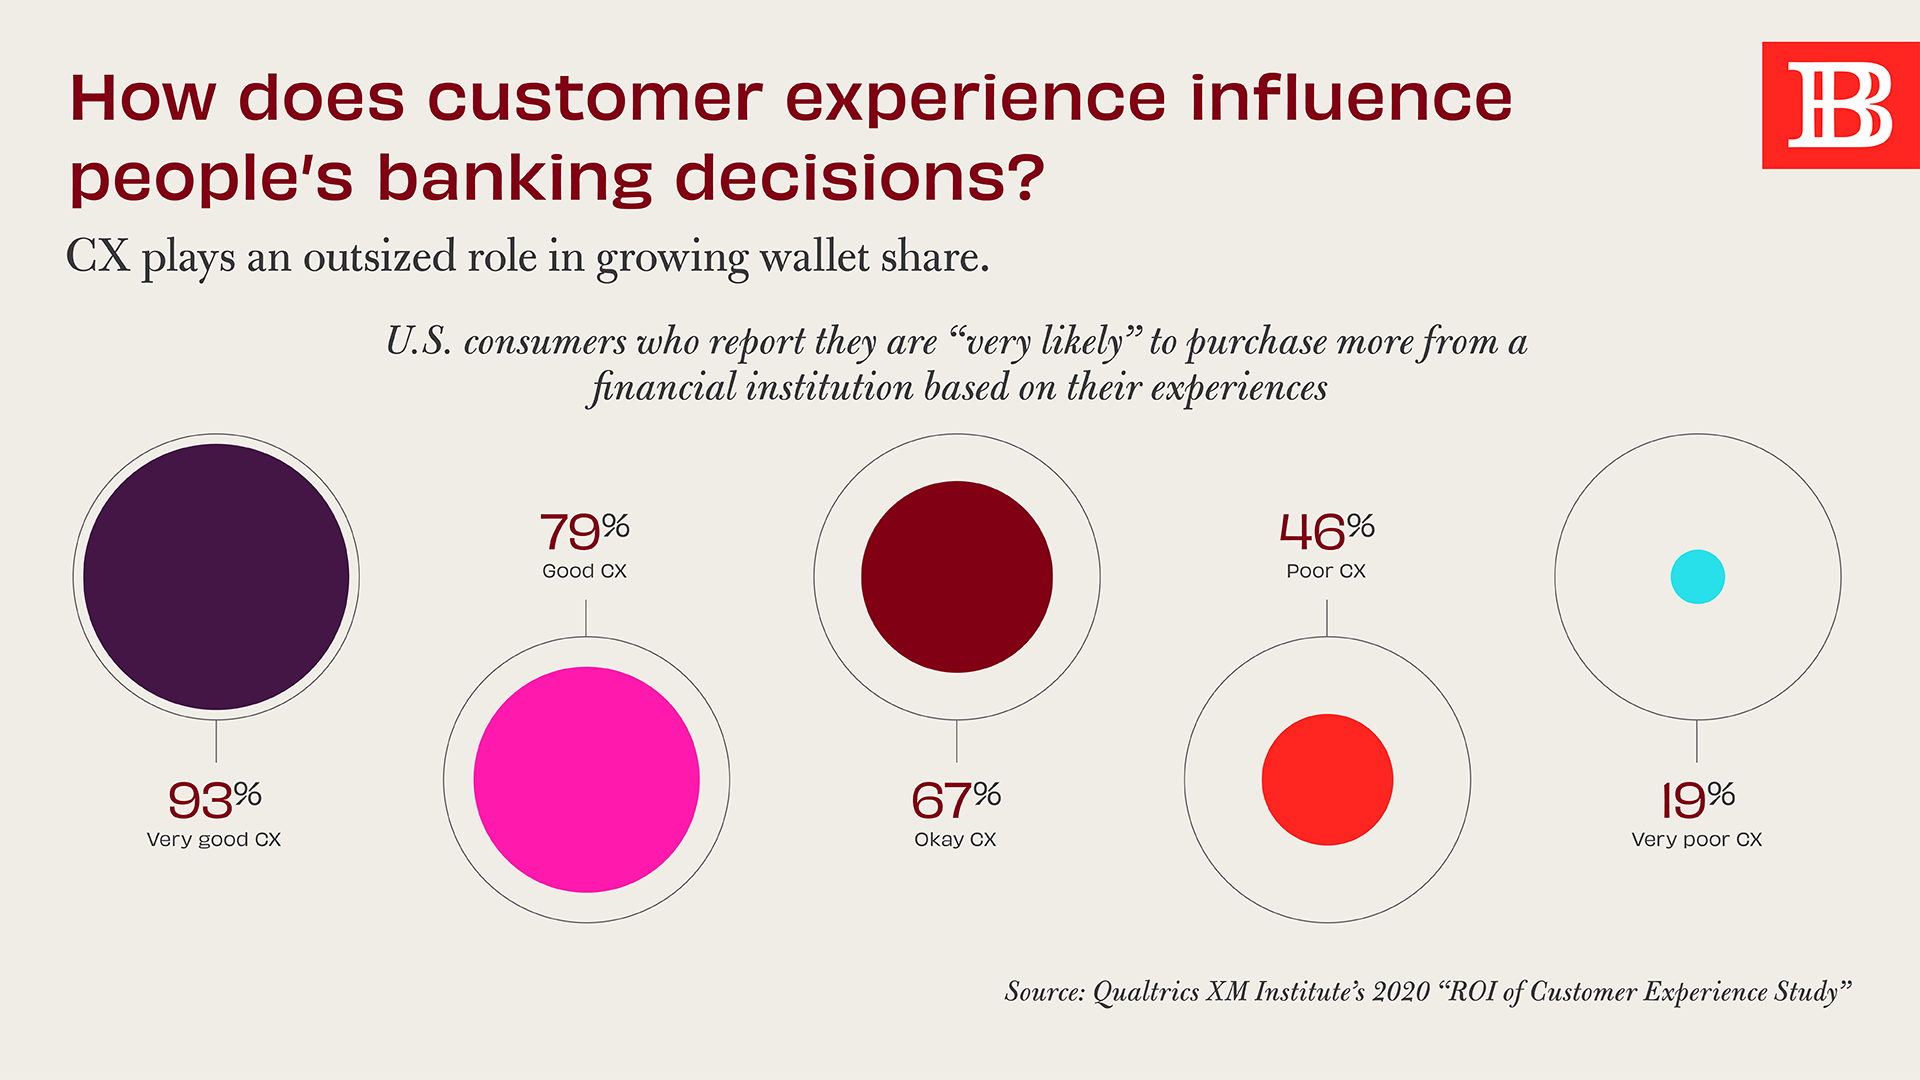 How does customer experience influence people’s banking decisions?